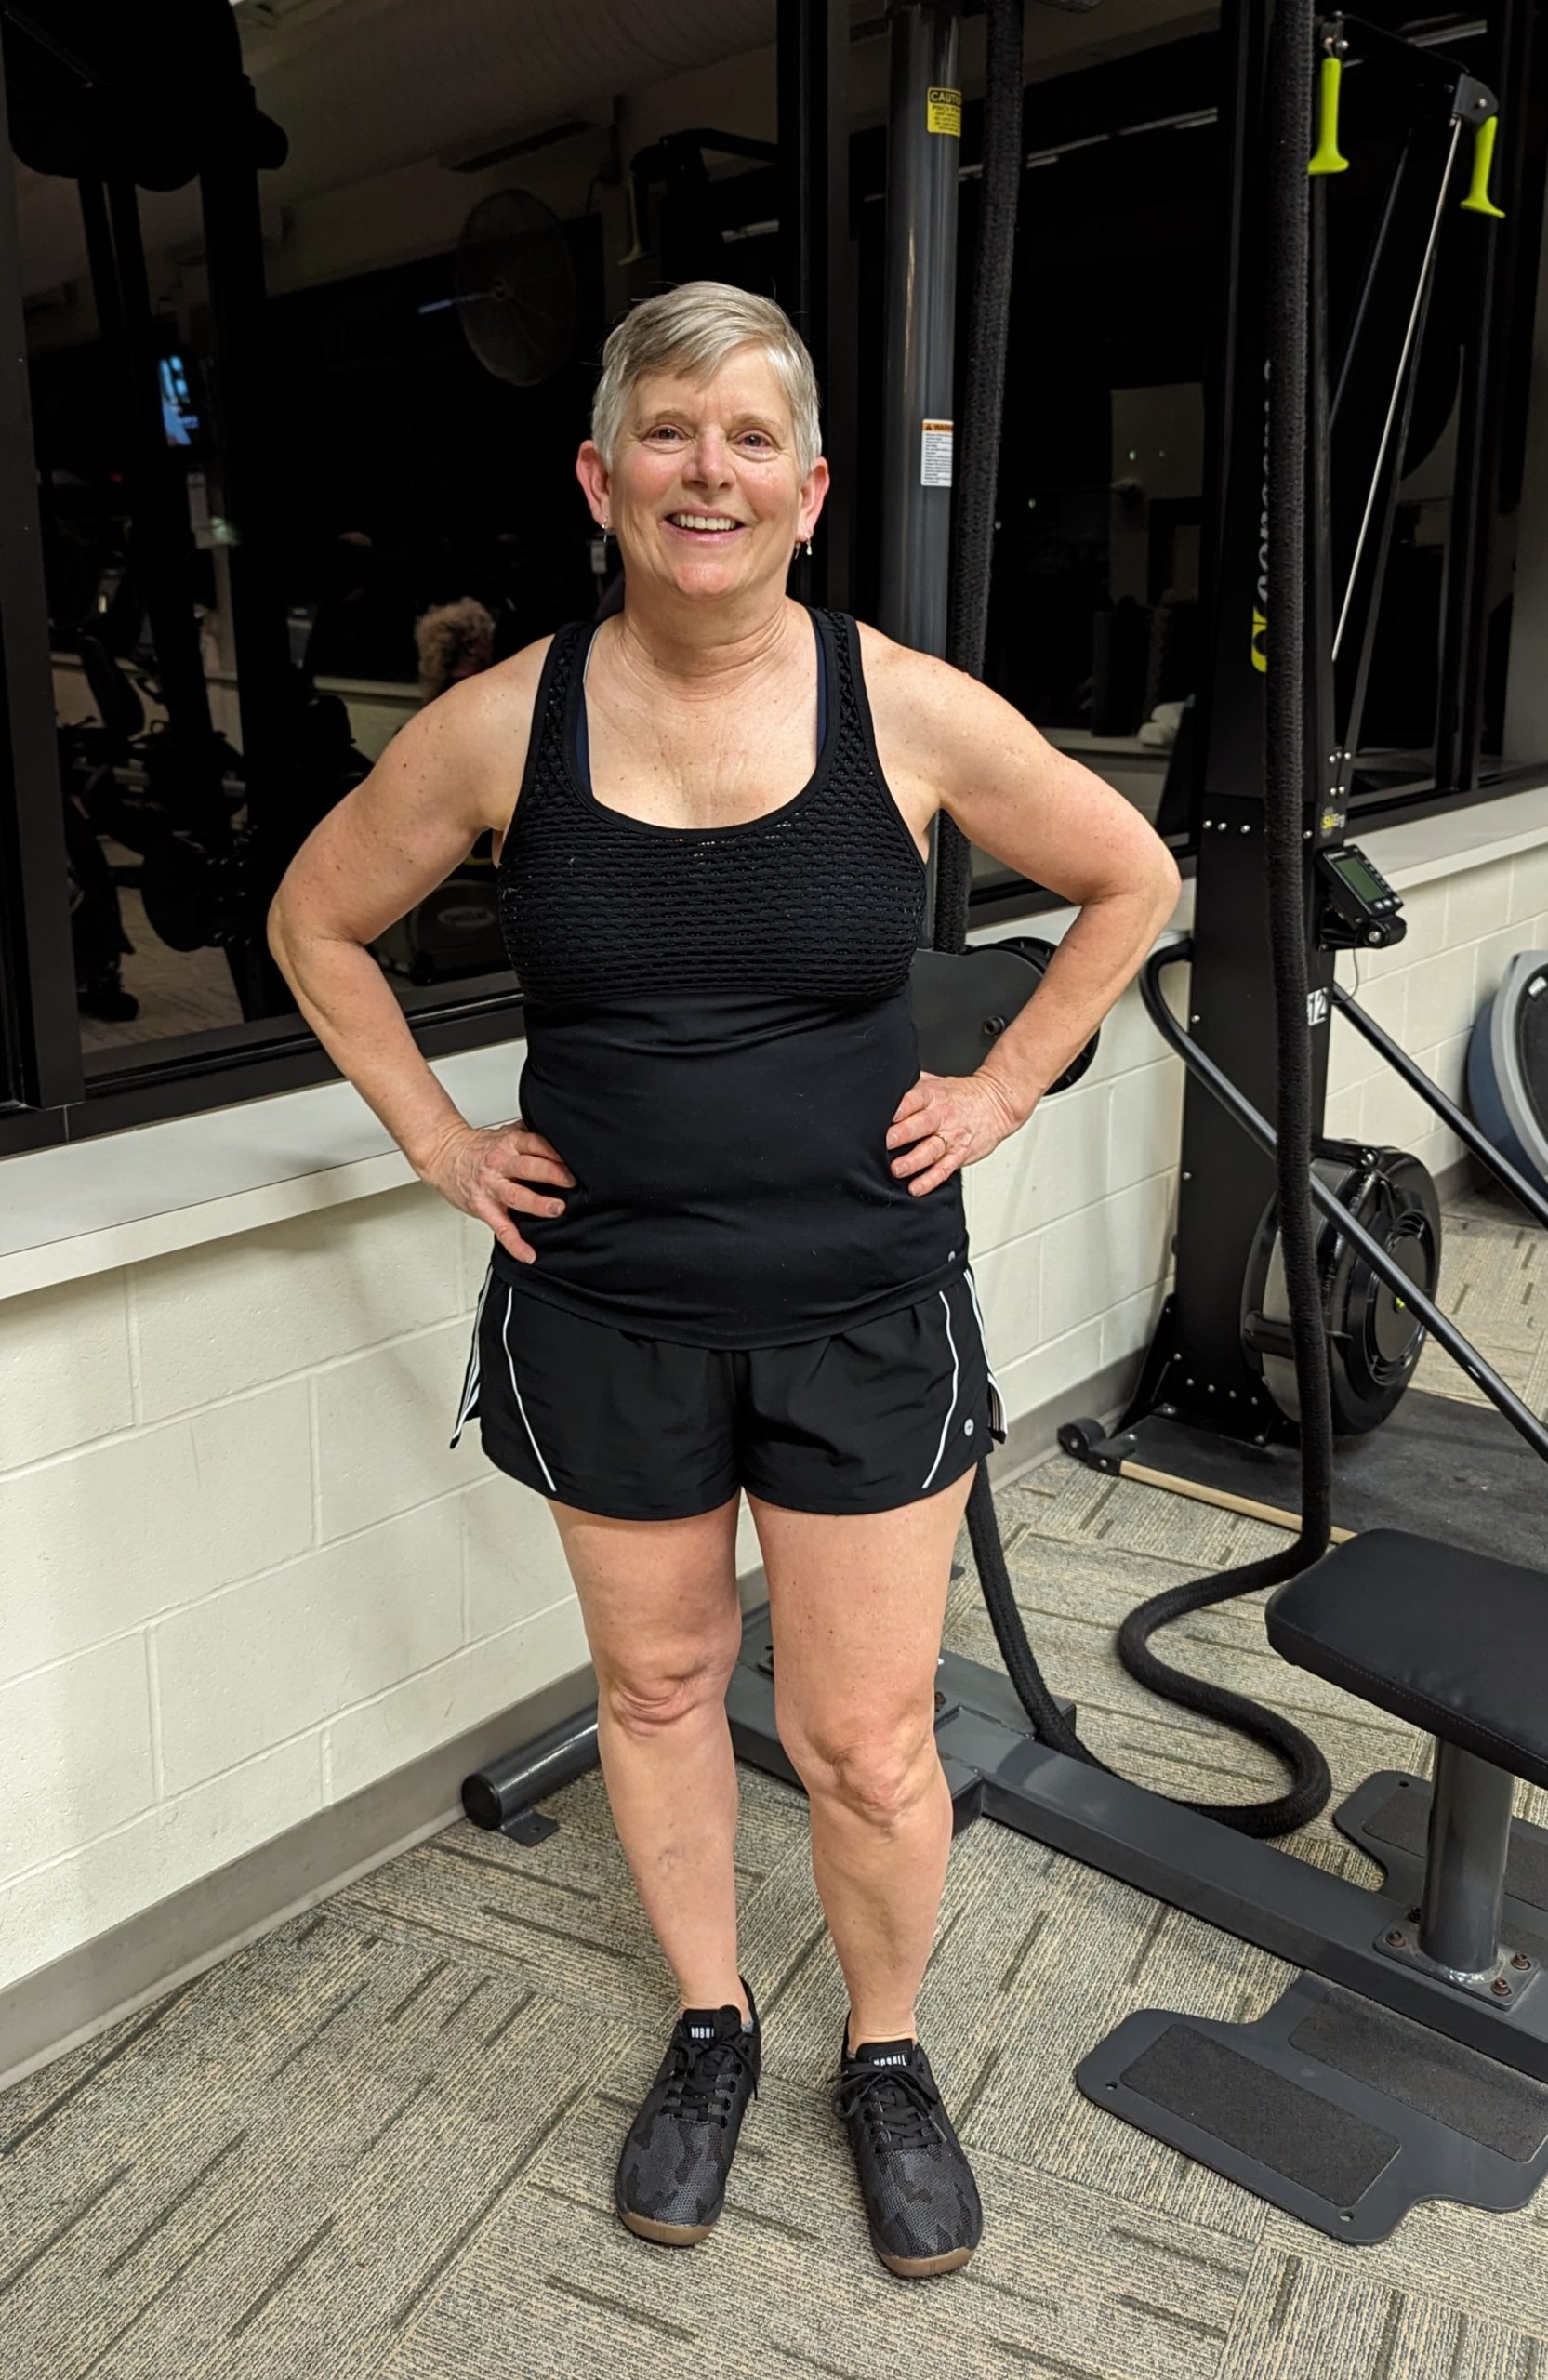 Transforming her body from a size 26 to a size 12: Kathy's Pilates